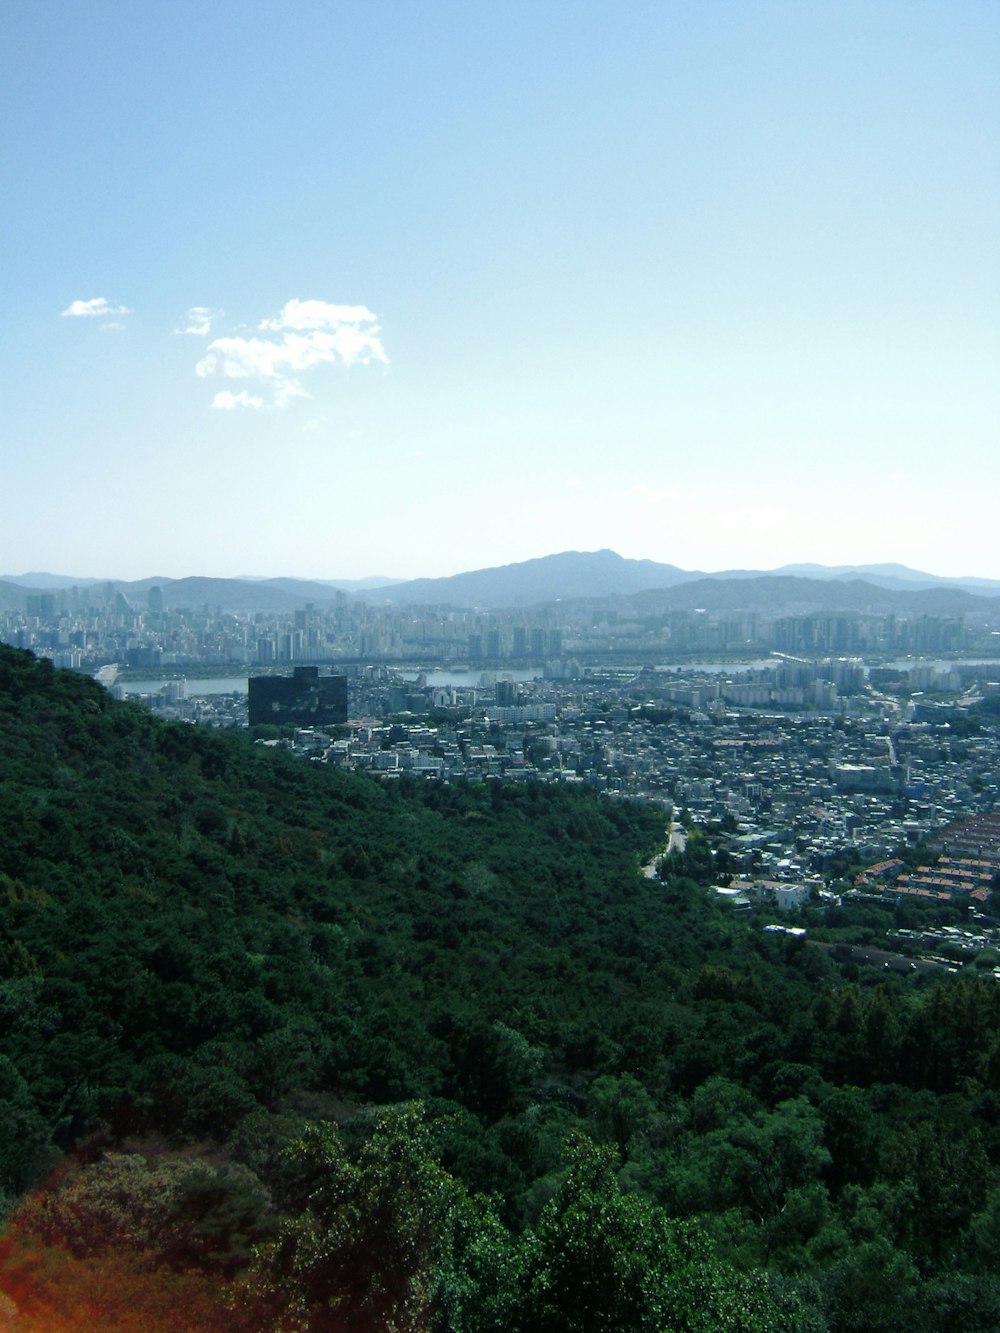 a view of a city from a hill